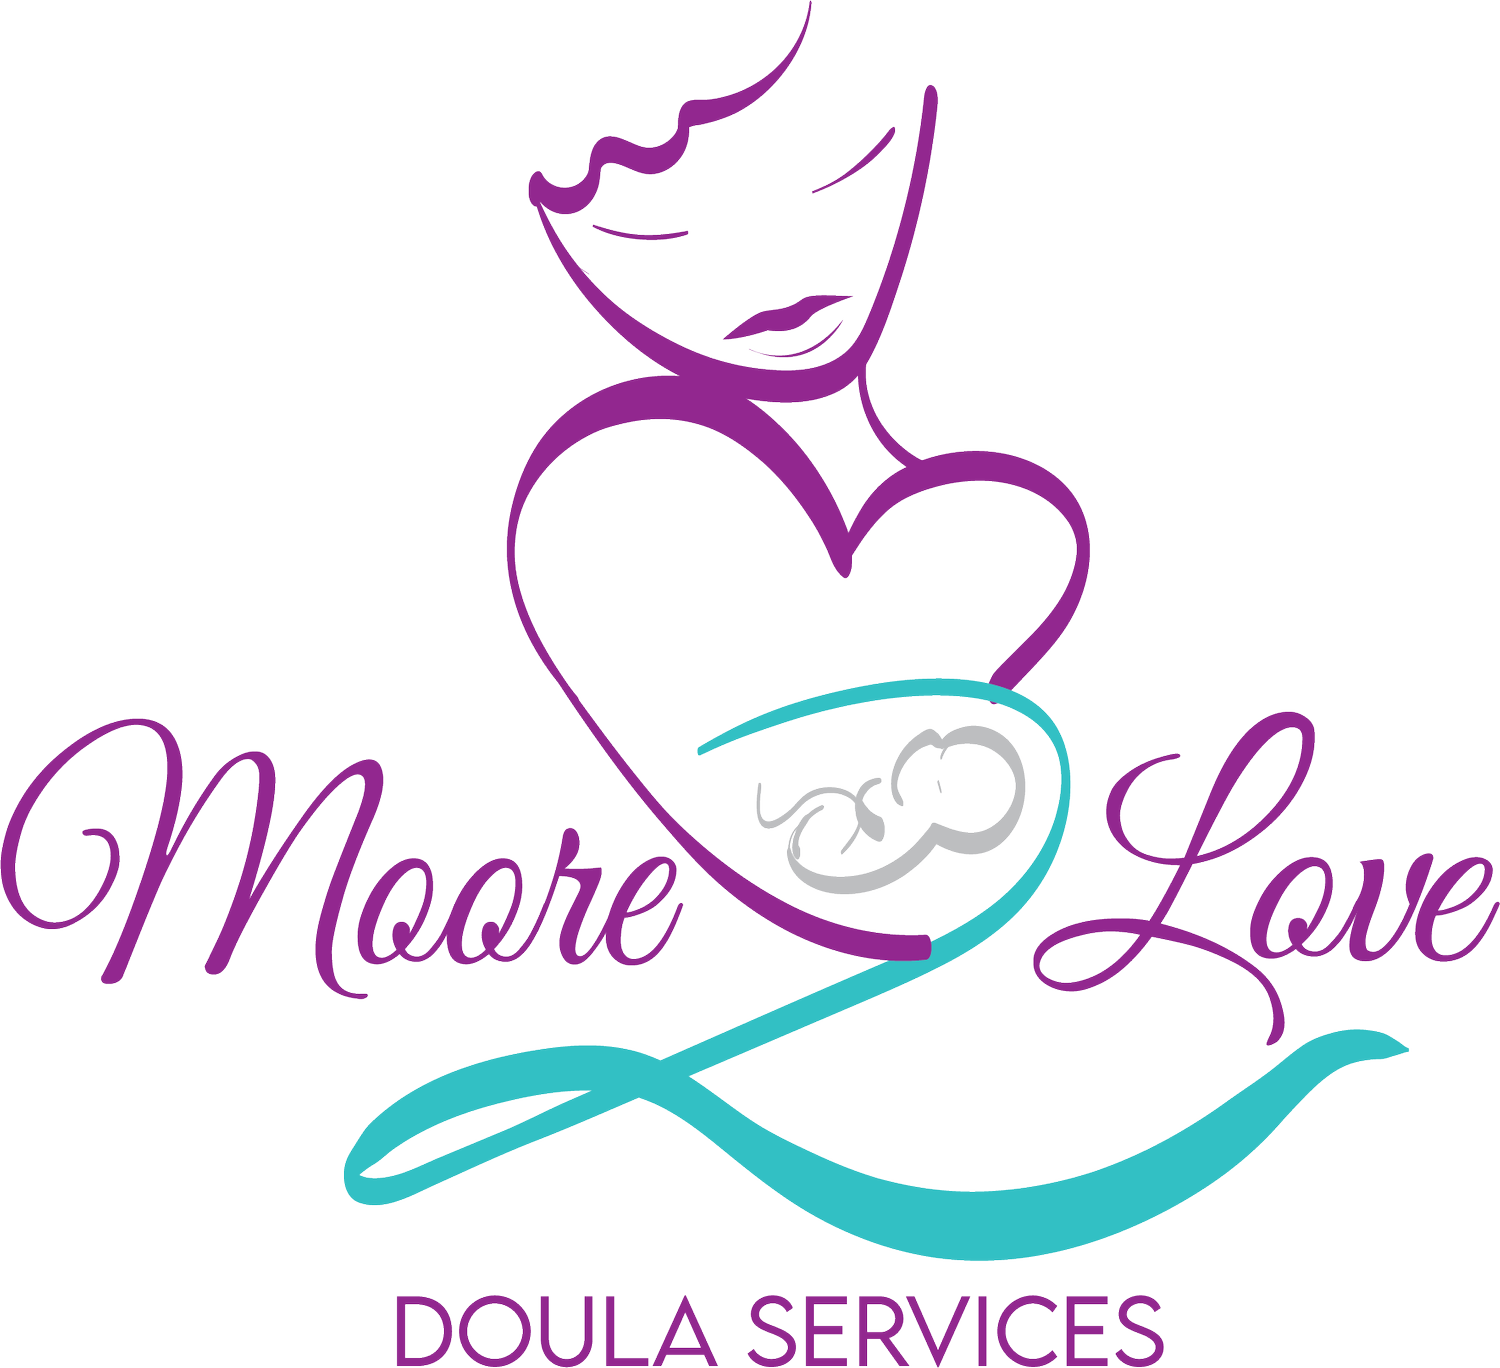 Moore 2 Love Doula Services